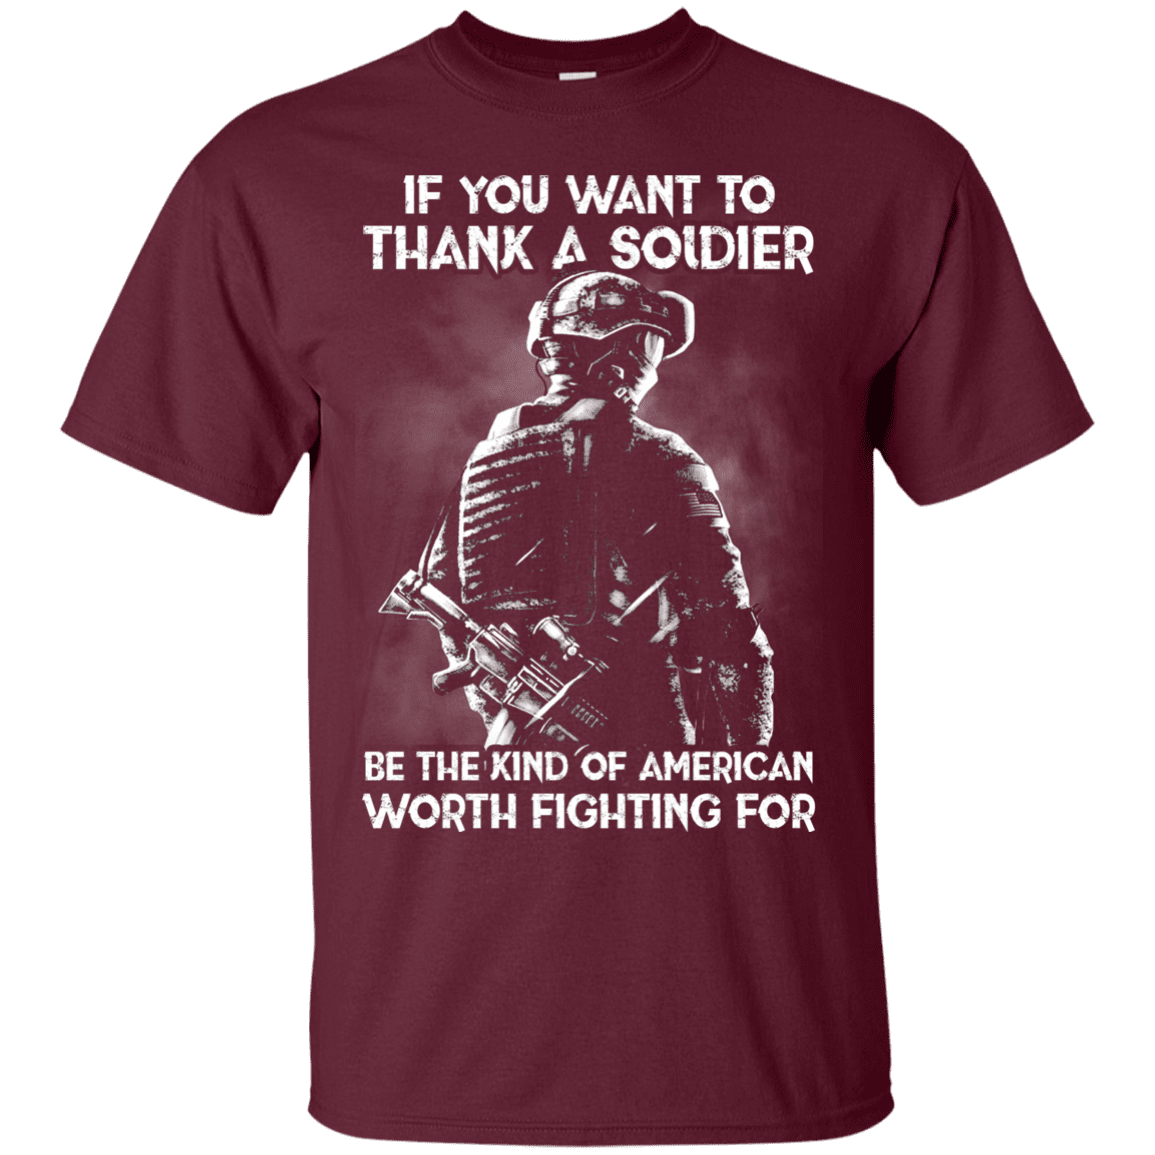 Military T-Shirt "If You Want To Thank A Soldier"-TShirt-General-Veterans Nation